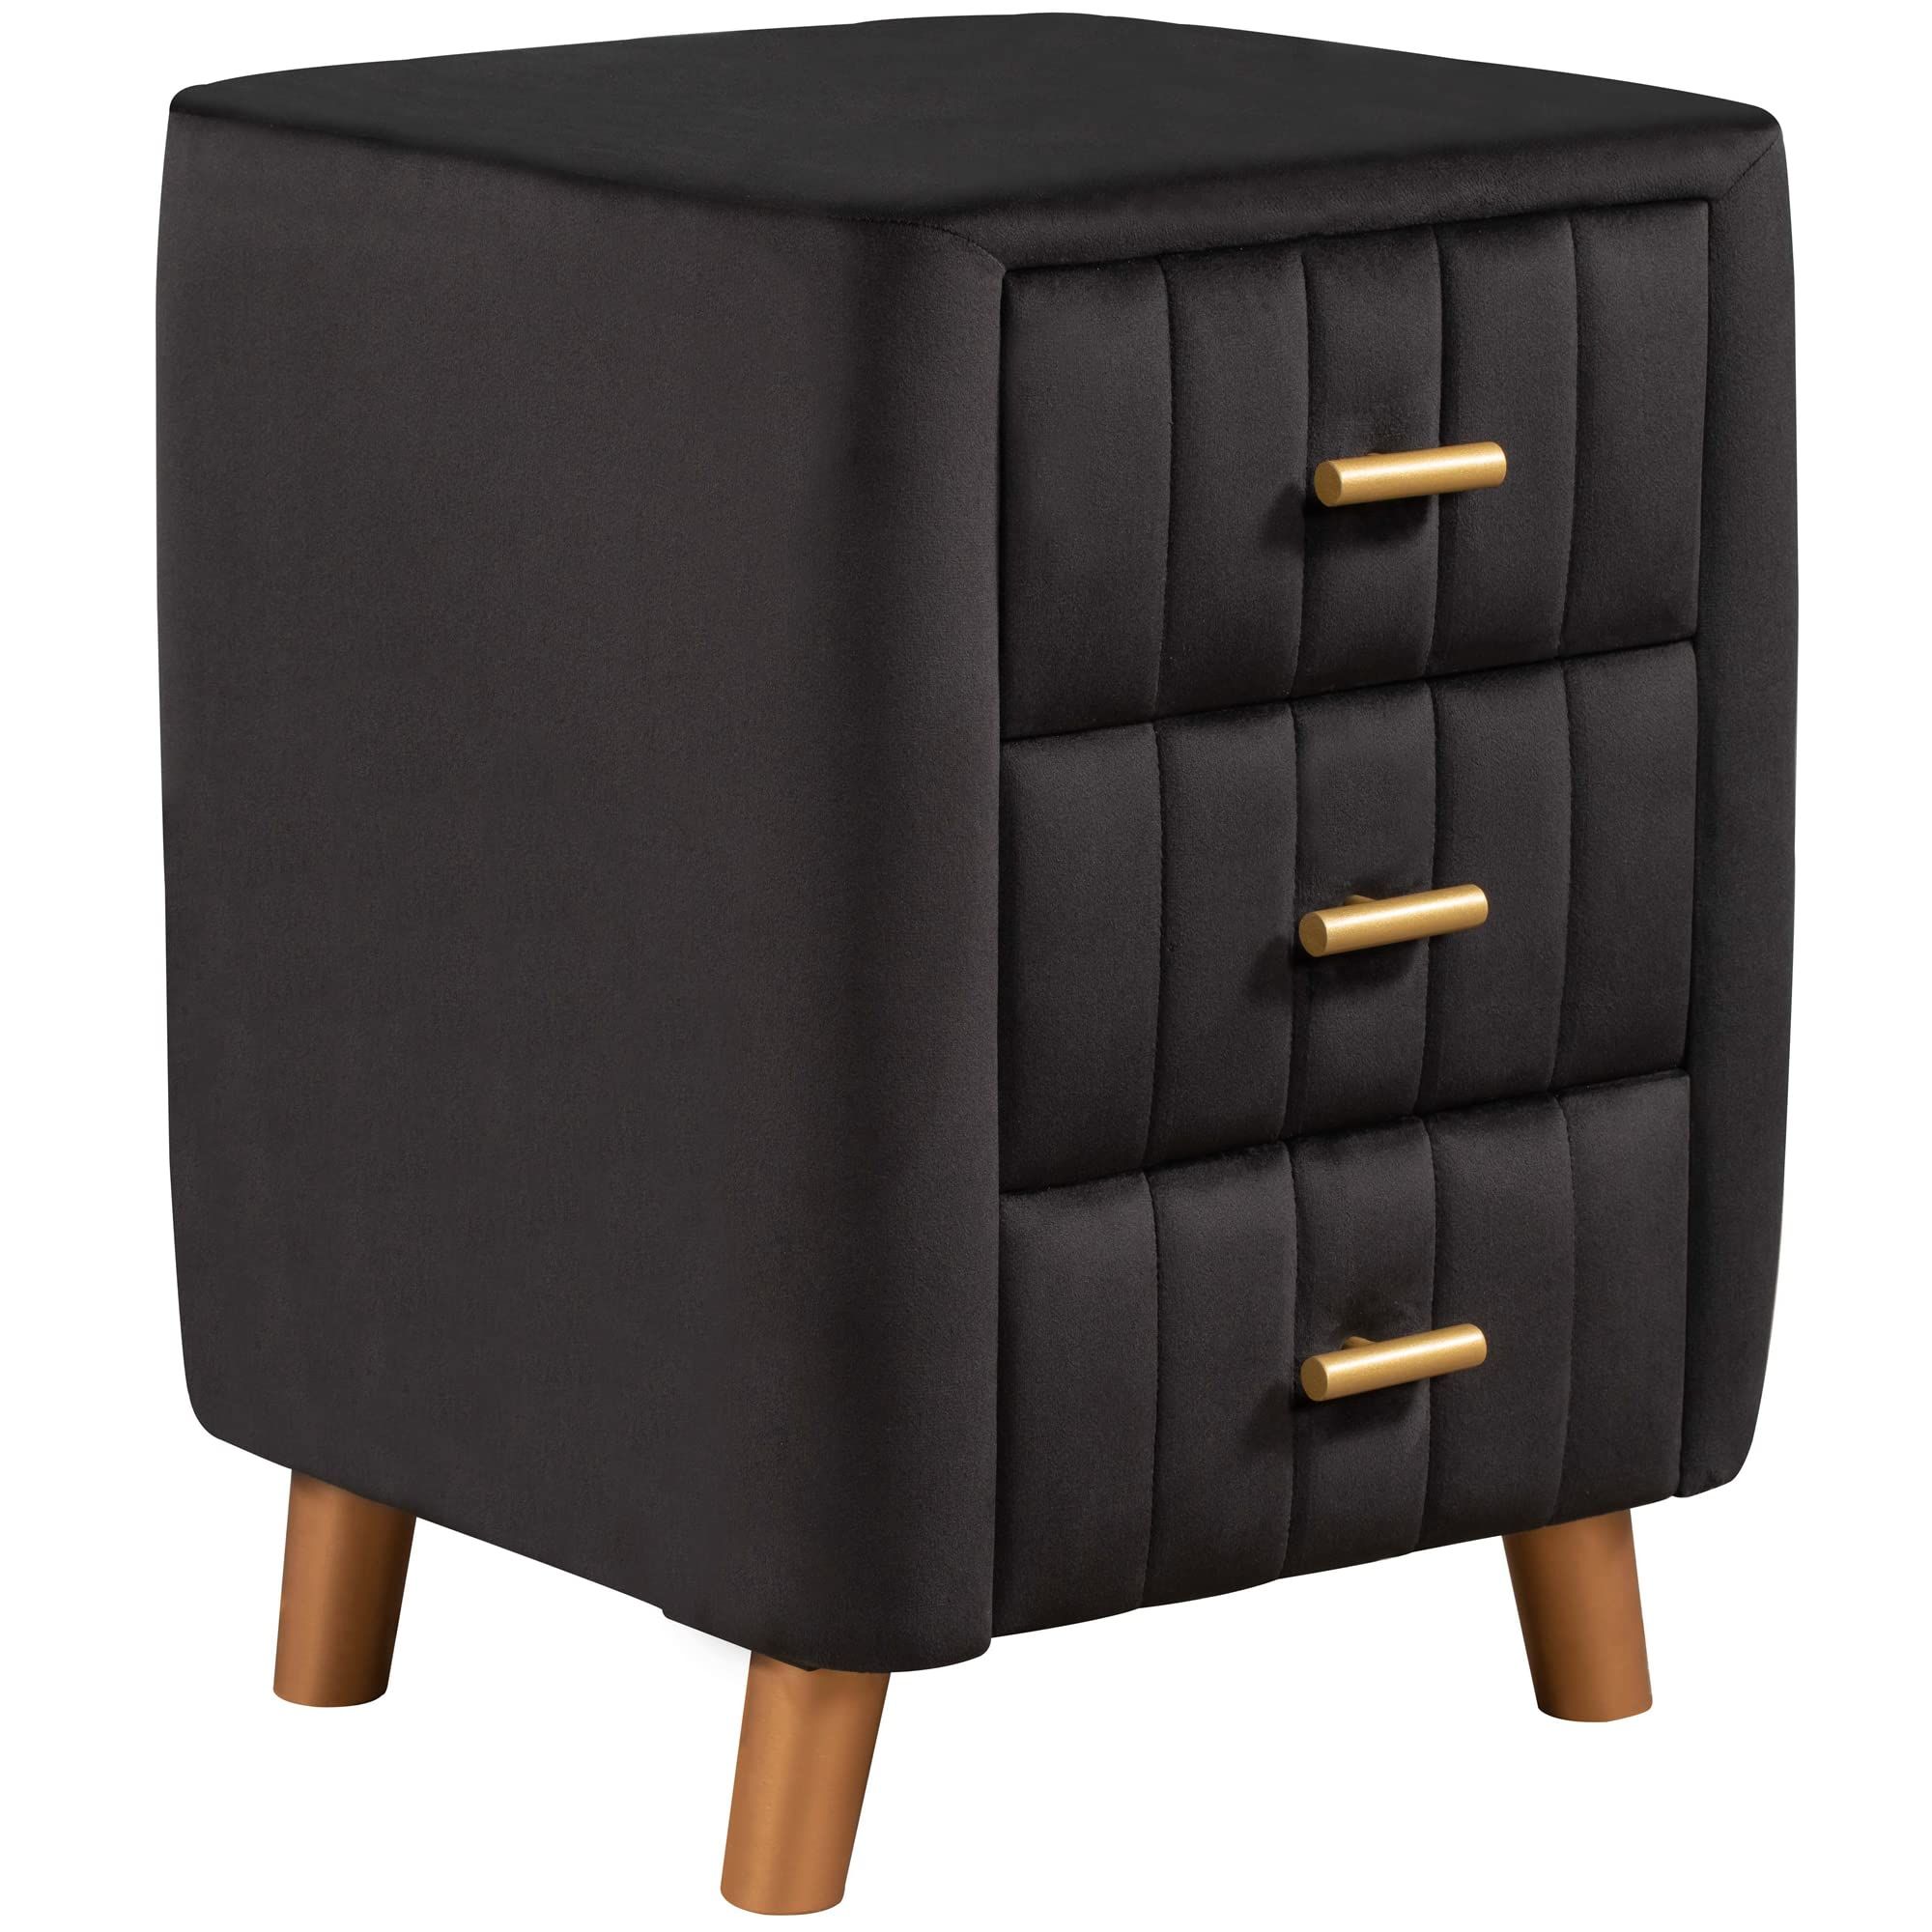 Nightstand, Bedroom Upholstery Nightstand with 3 Drawers and Diamond Handles, Modern and Contemporar | Amazon (US)